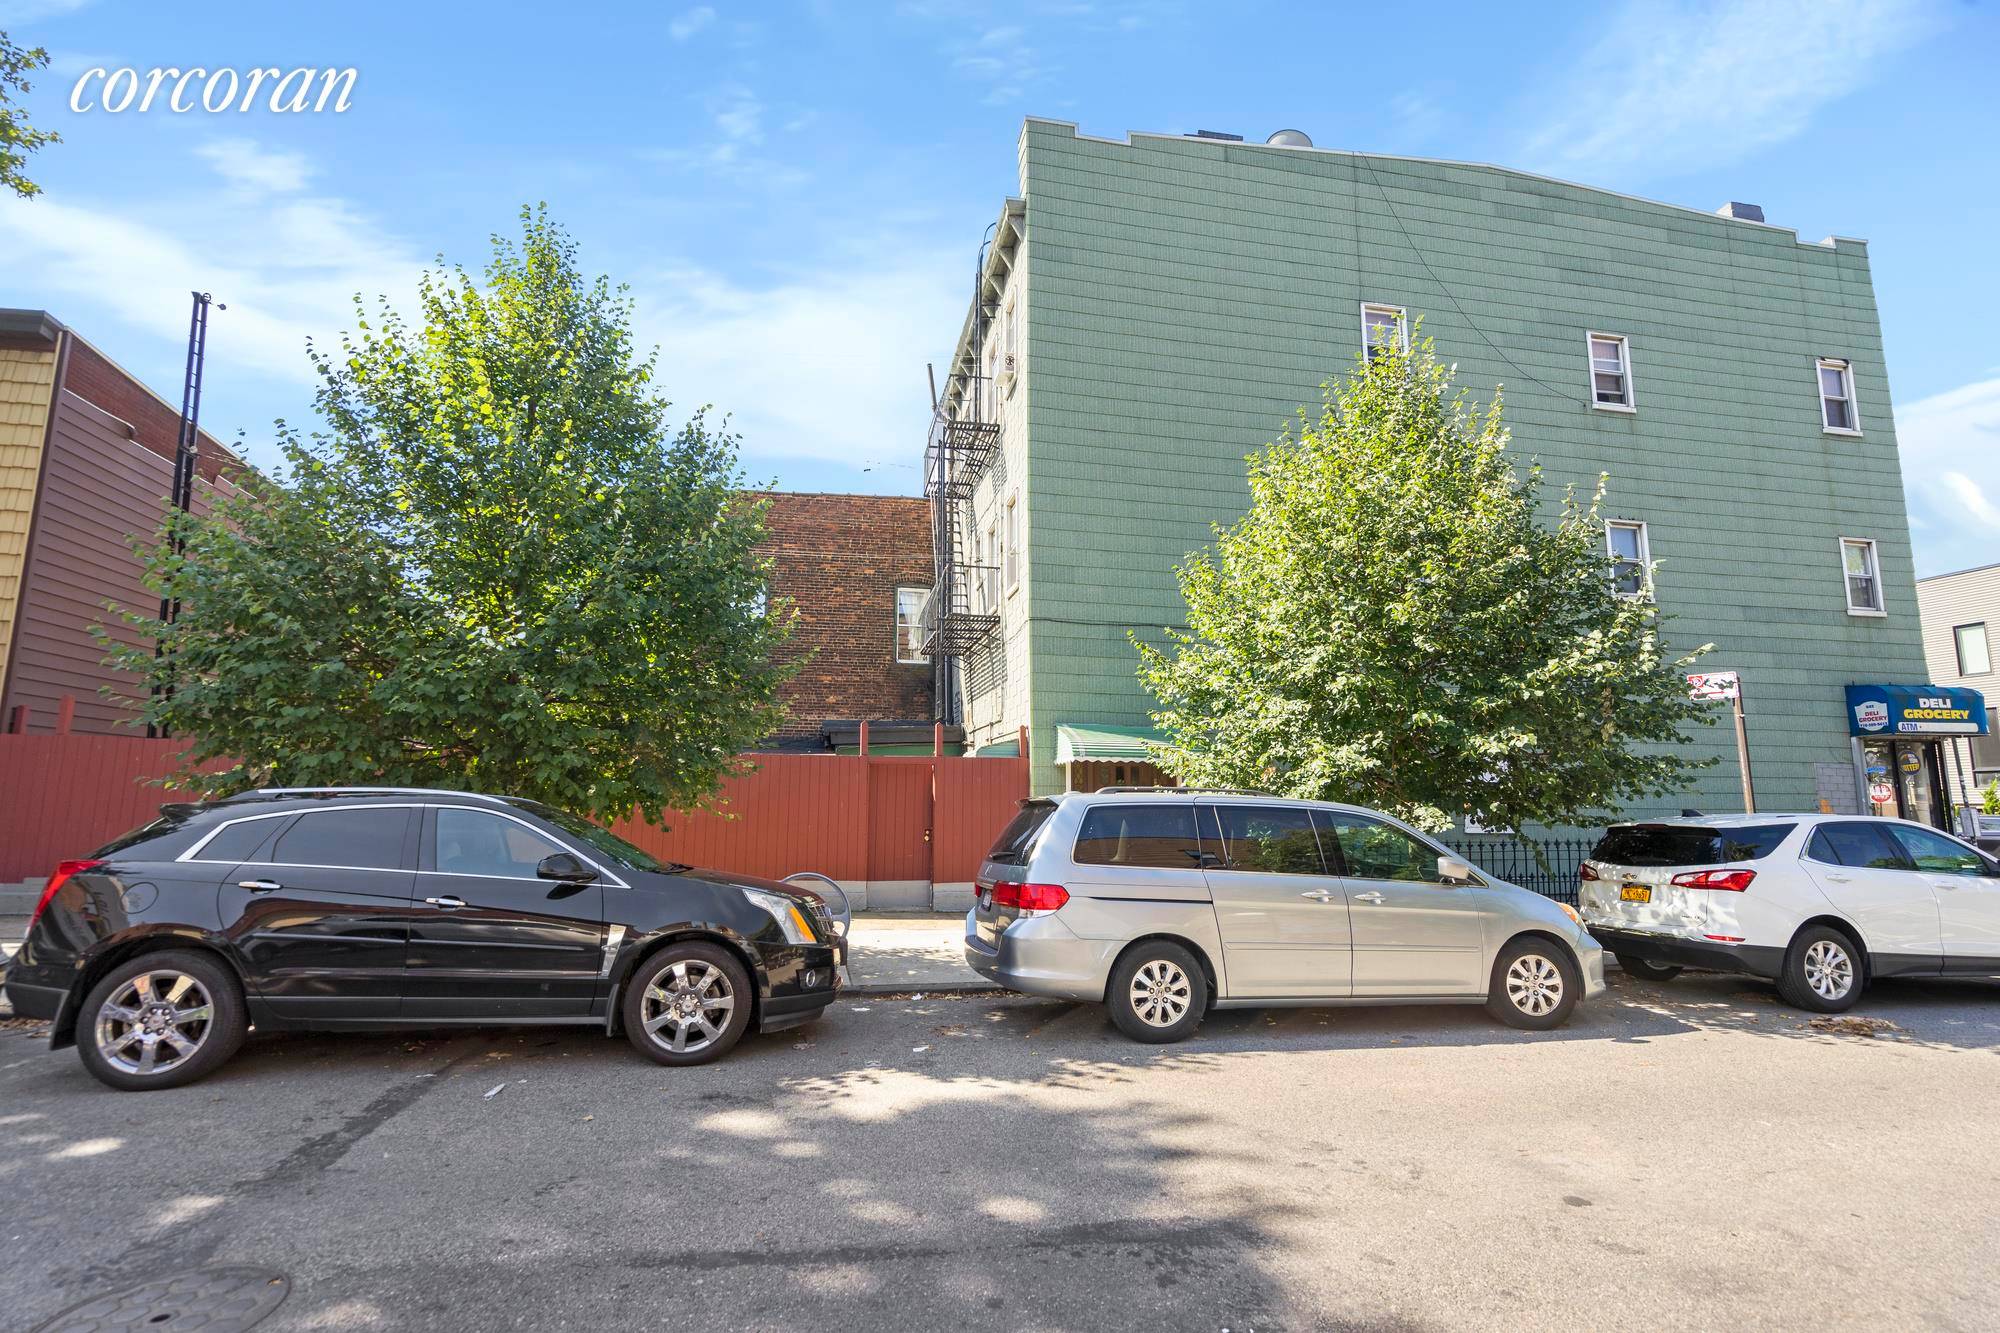 The rare offering on 642 Lorimer Street, located in the bustling neighborhood of East Williamsburg, Brooklyn.